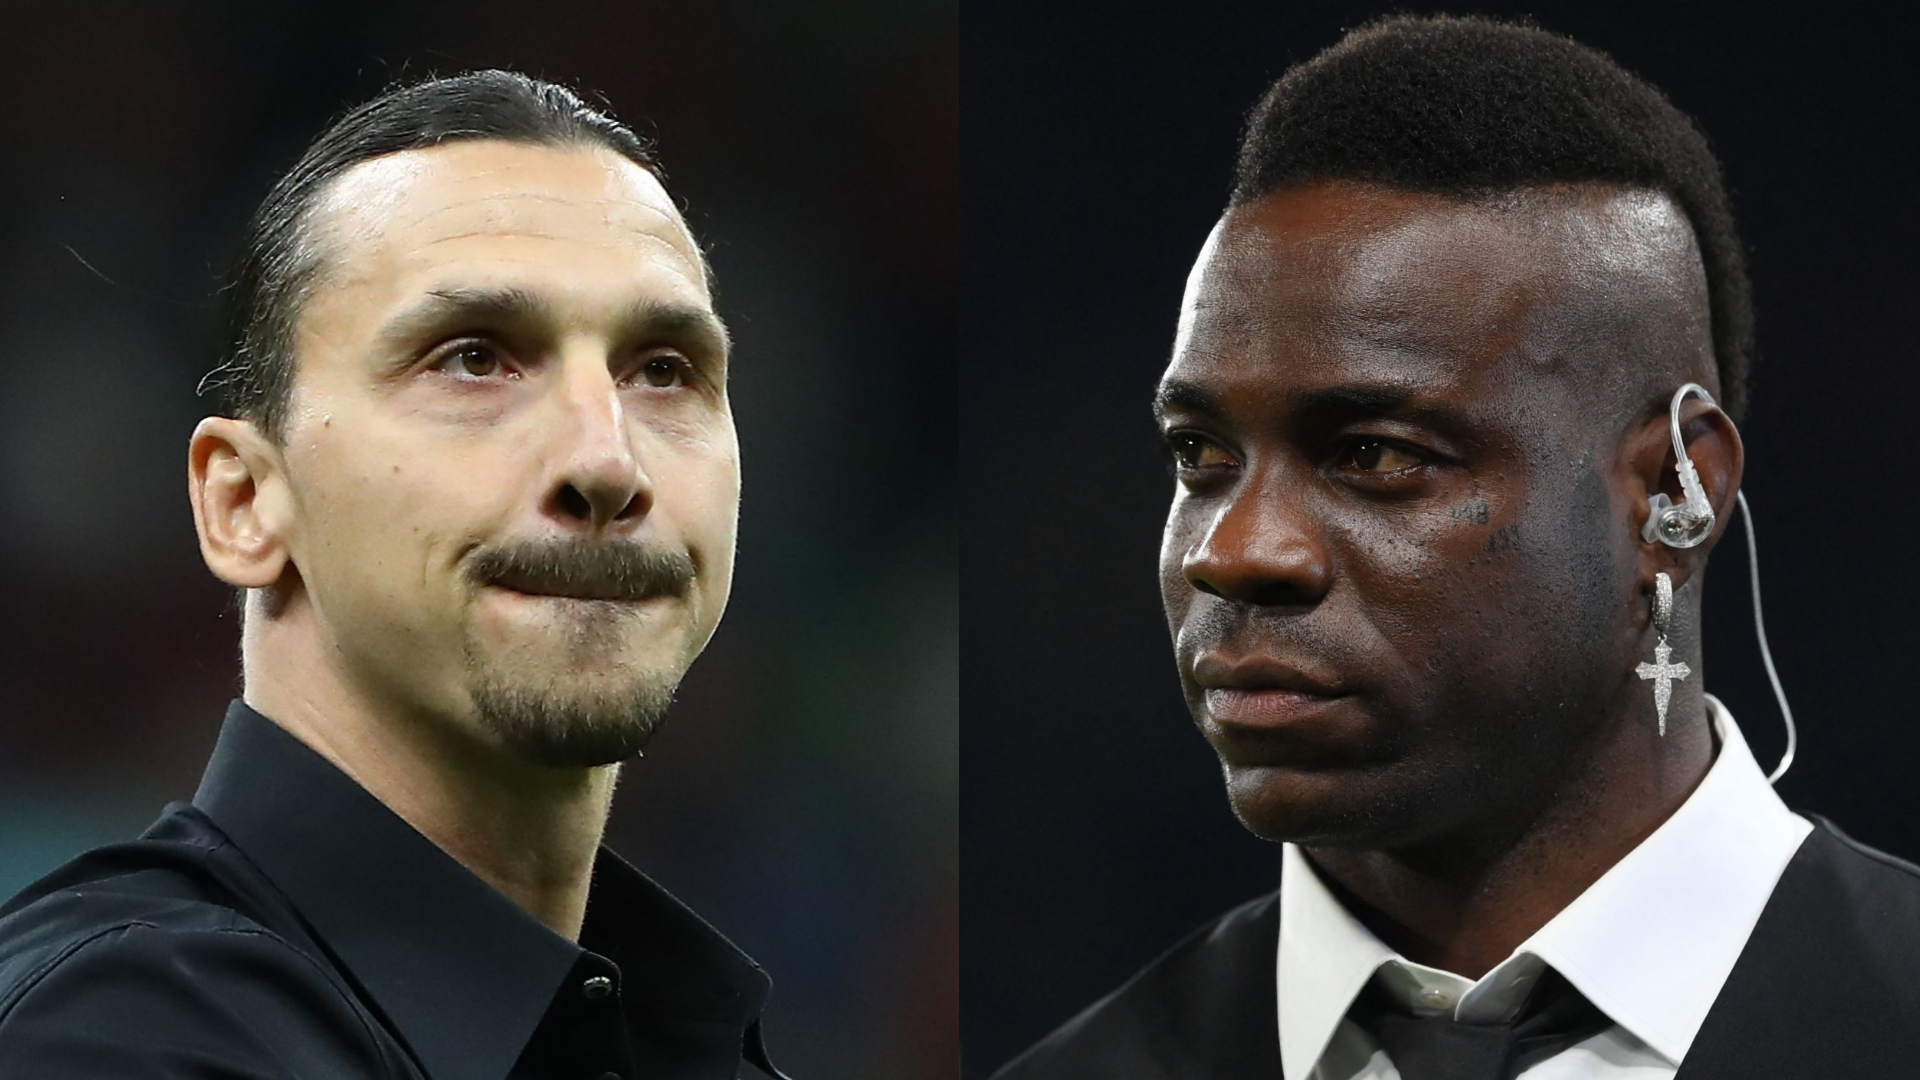 Take that, Zlatan! Mario Balotelli shows off Champions League trophy as he responds to AC Milan legend Ibrahimovic’s criticism | Goal.com Cameroon